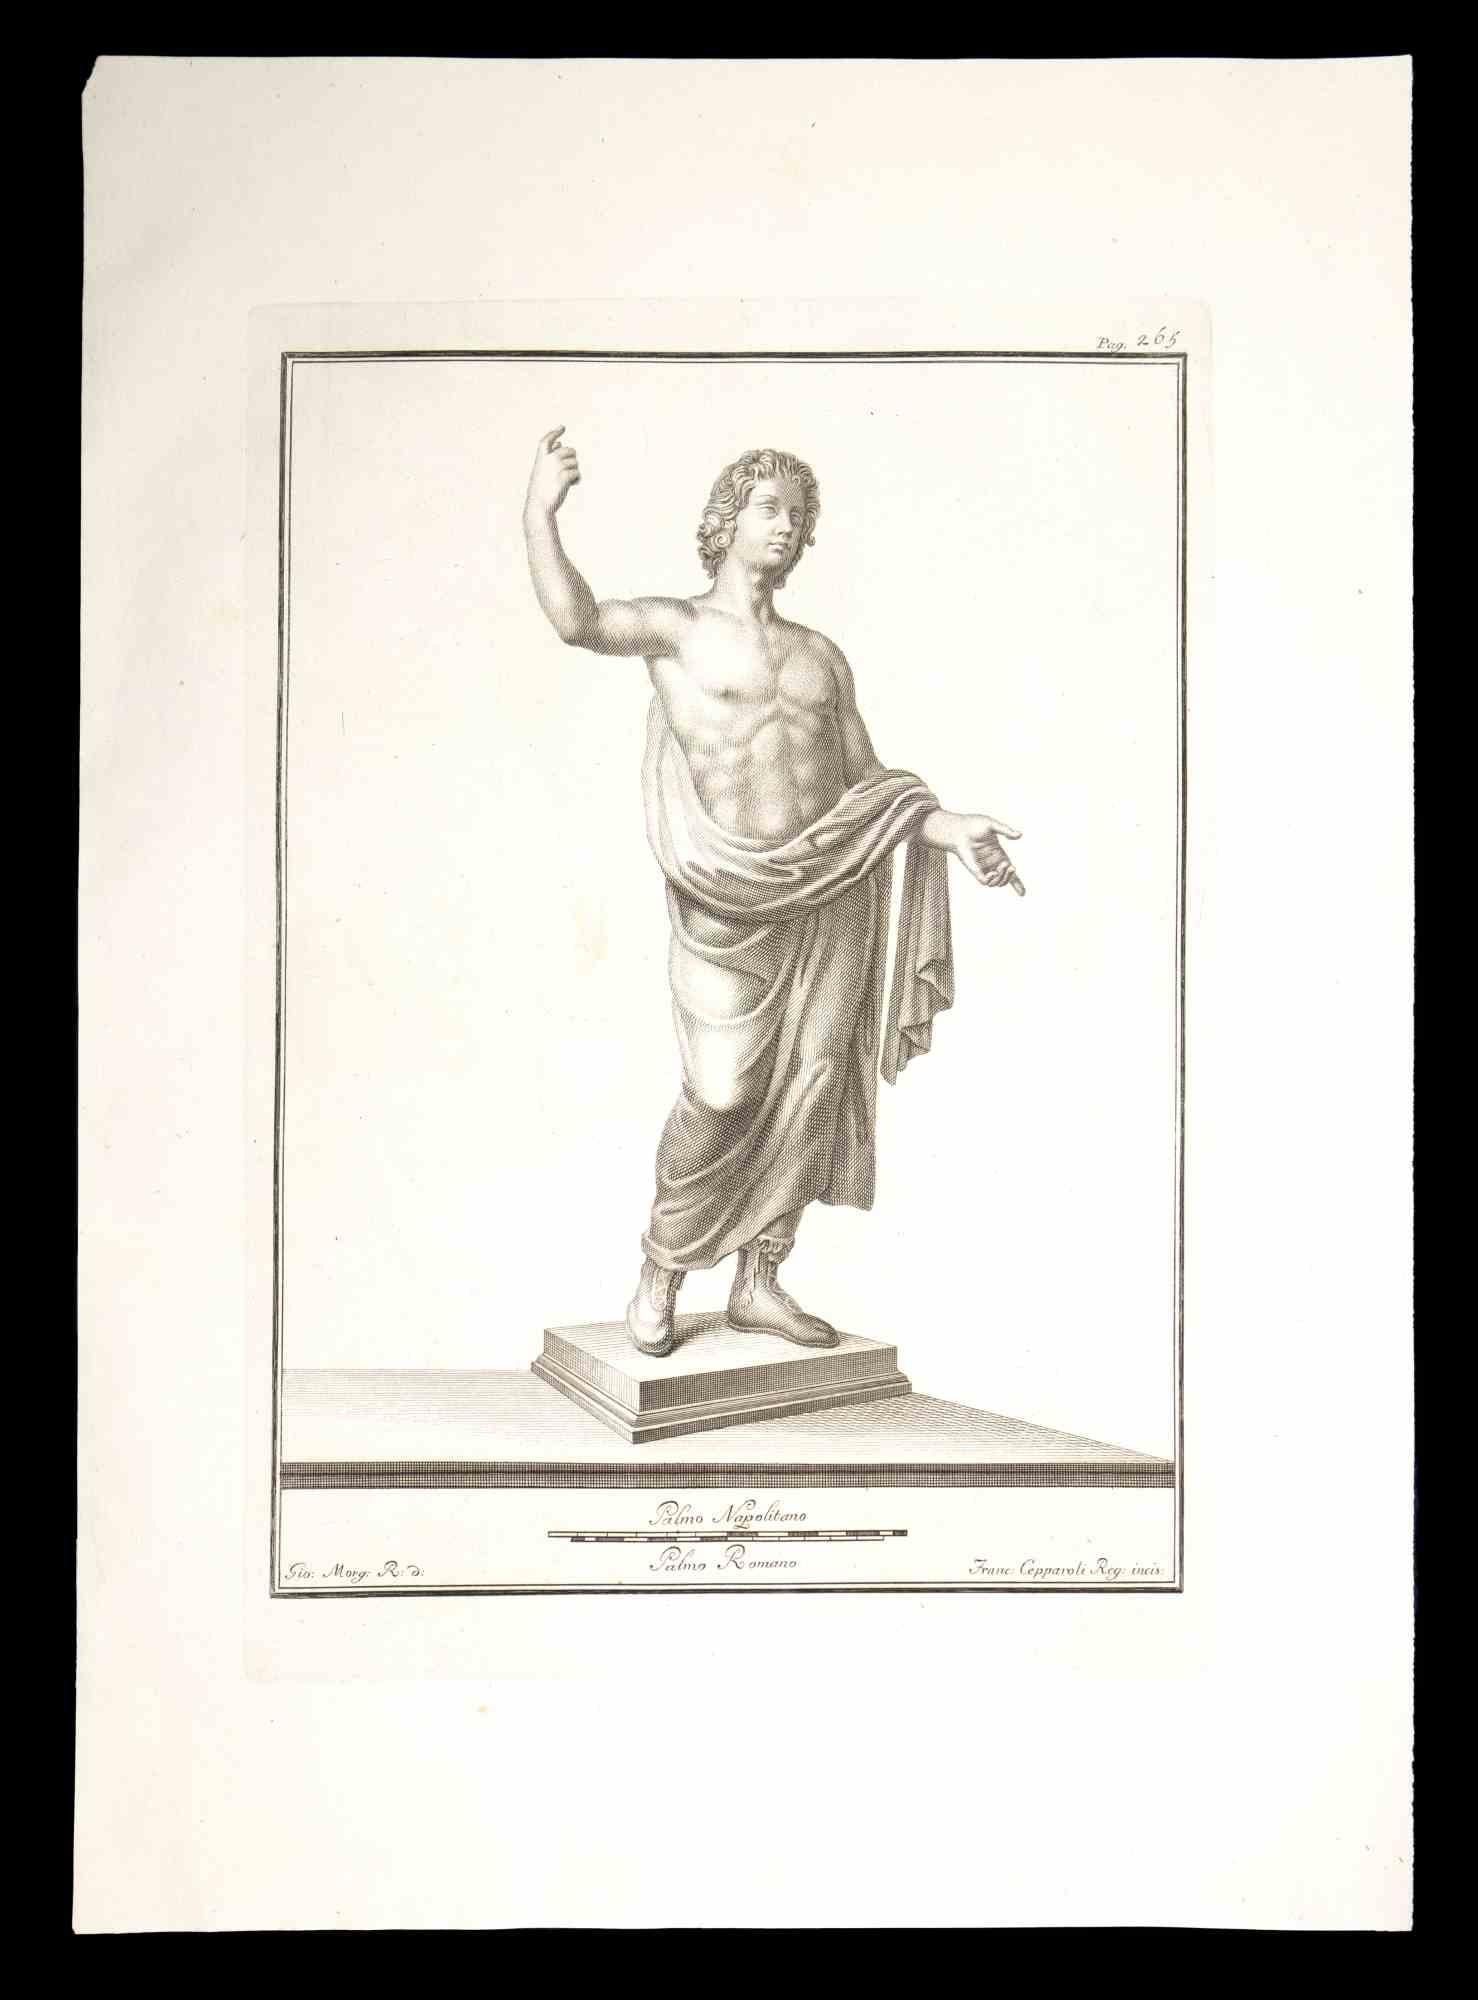 Ancient Roman Statue, from the series "Antiquities of Herculaneum", is an original etching on paper realized by Francesco Cepparoli in the 18th century.

Signed on the plate, on the lower right.

Good conditions with slight folding and minor